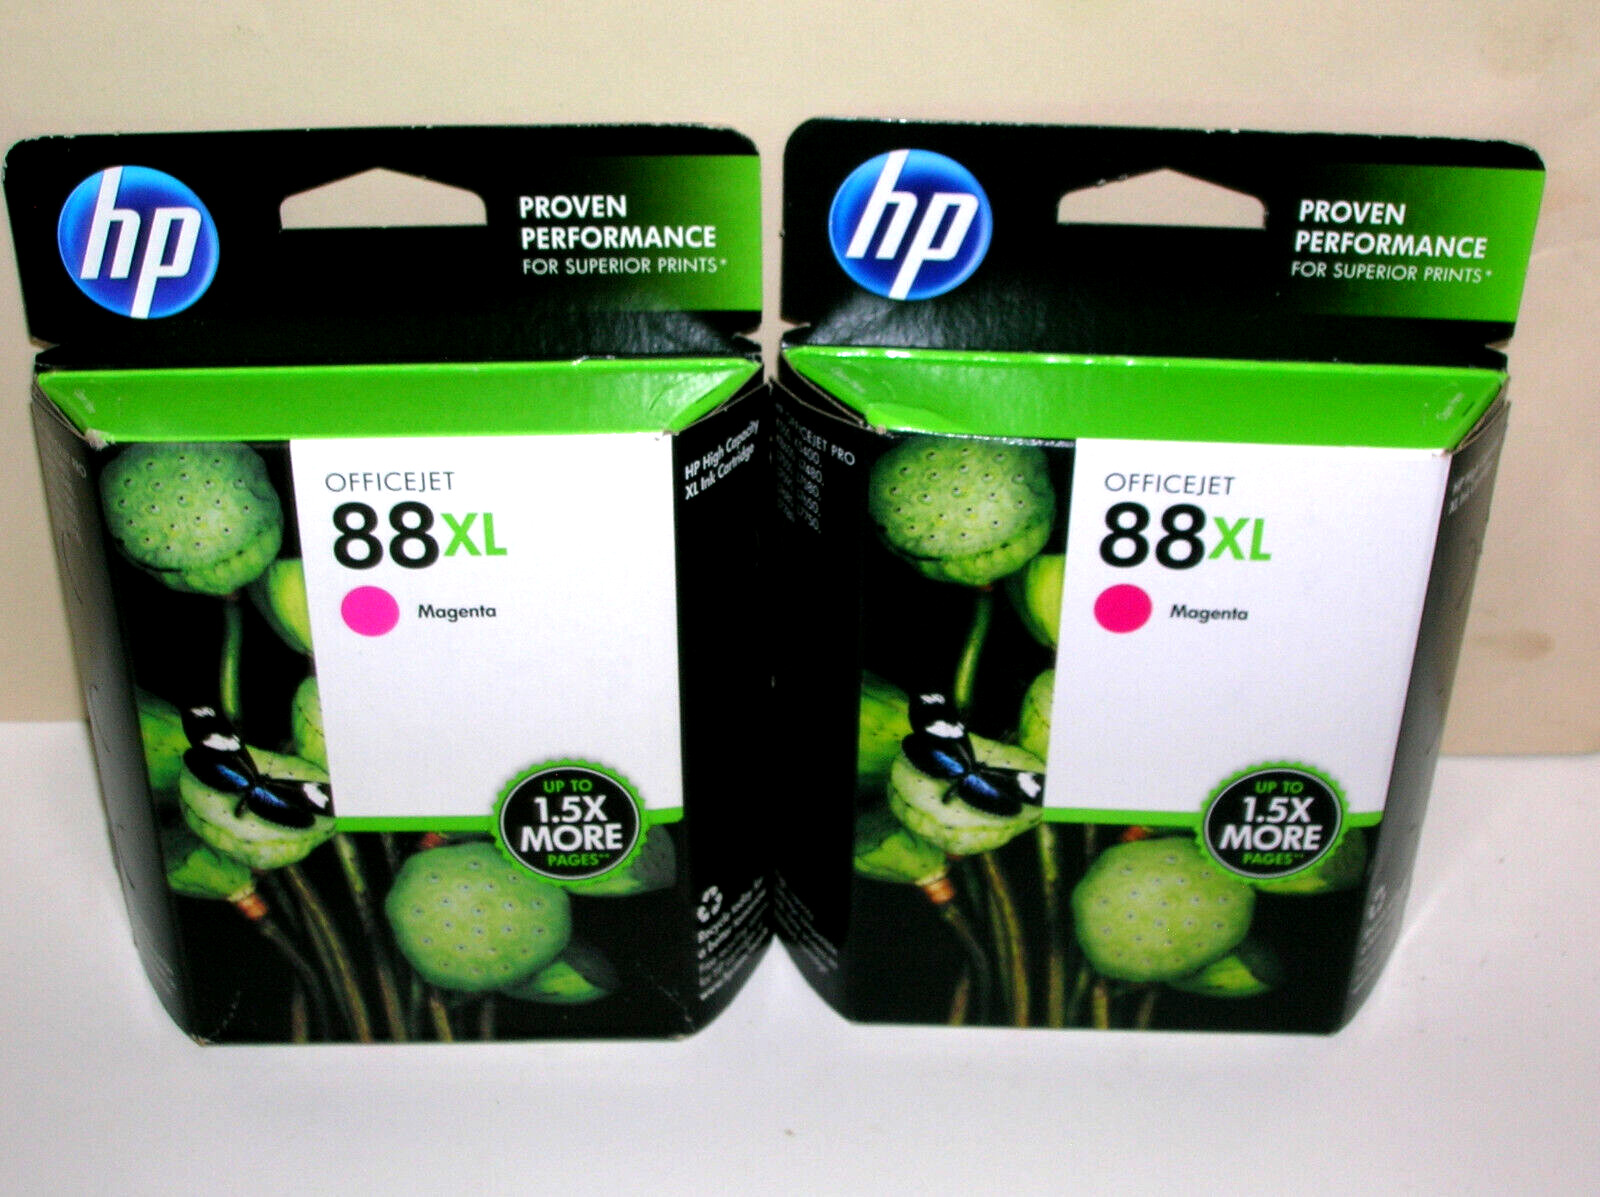 Qty 2 Genuine HP 88XL Magenta Ink Cartridges Exp 2014 Factory Sealed High Yield